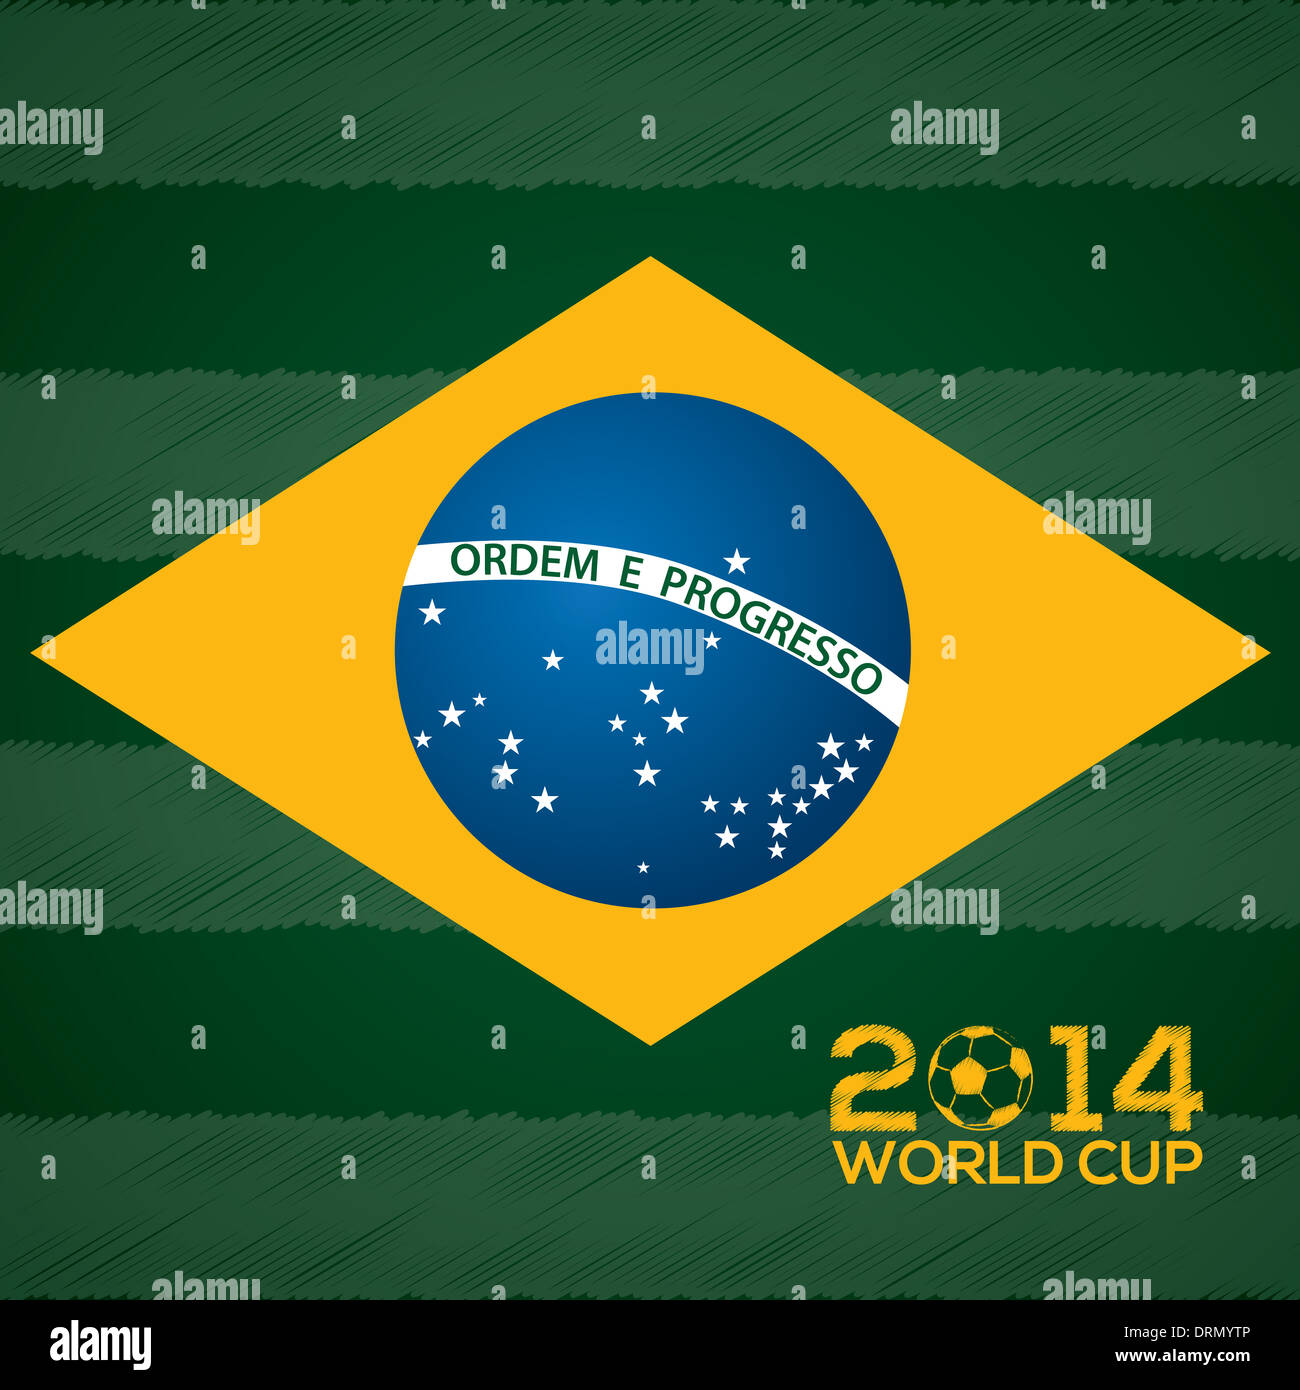 Abstract poster design with Brasil flag and 2014 world cup text Stock Photo